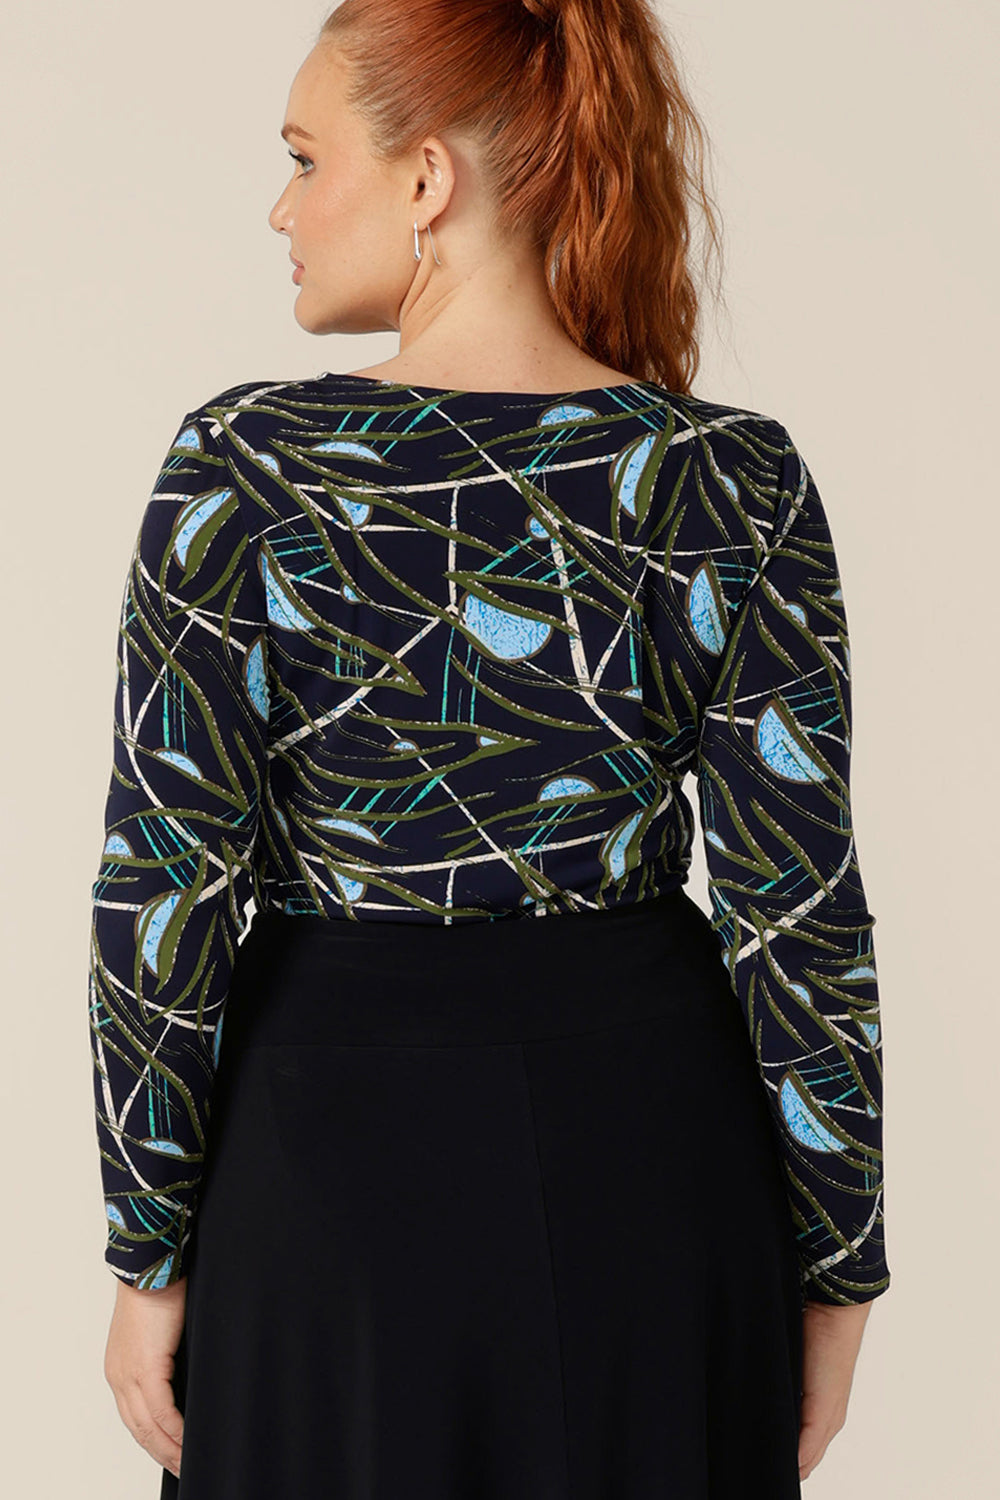 Back view of a size 12, curvy woman wearing a long sleeve, boat neck top by Australian and New Zealand women's clothing brand, L&F. Featuring a blue, green and white print on a navy jersey base, this top is available to shop Australia and New Zealand-wide in sizes 8 to 24.  